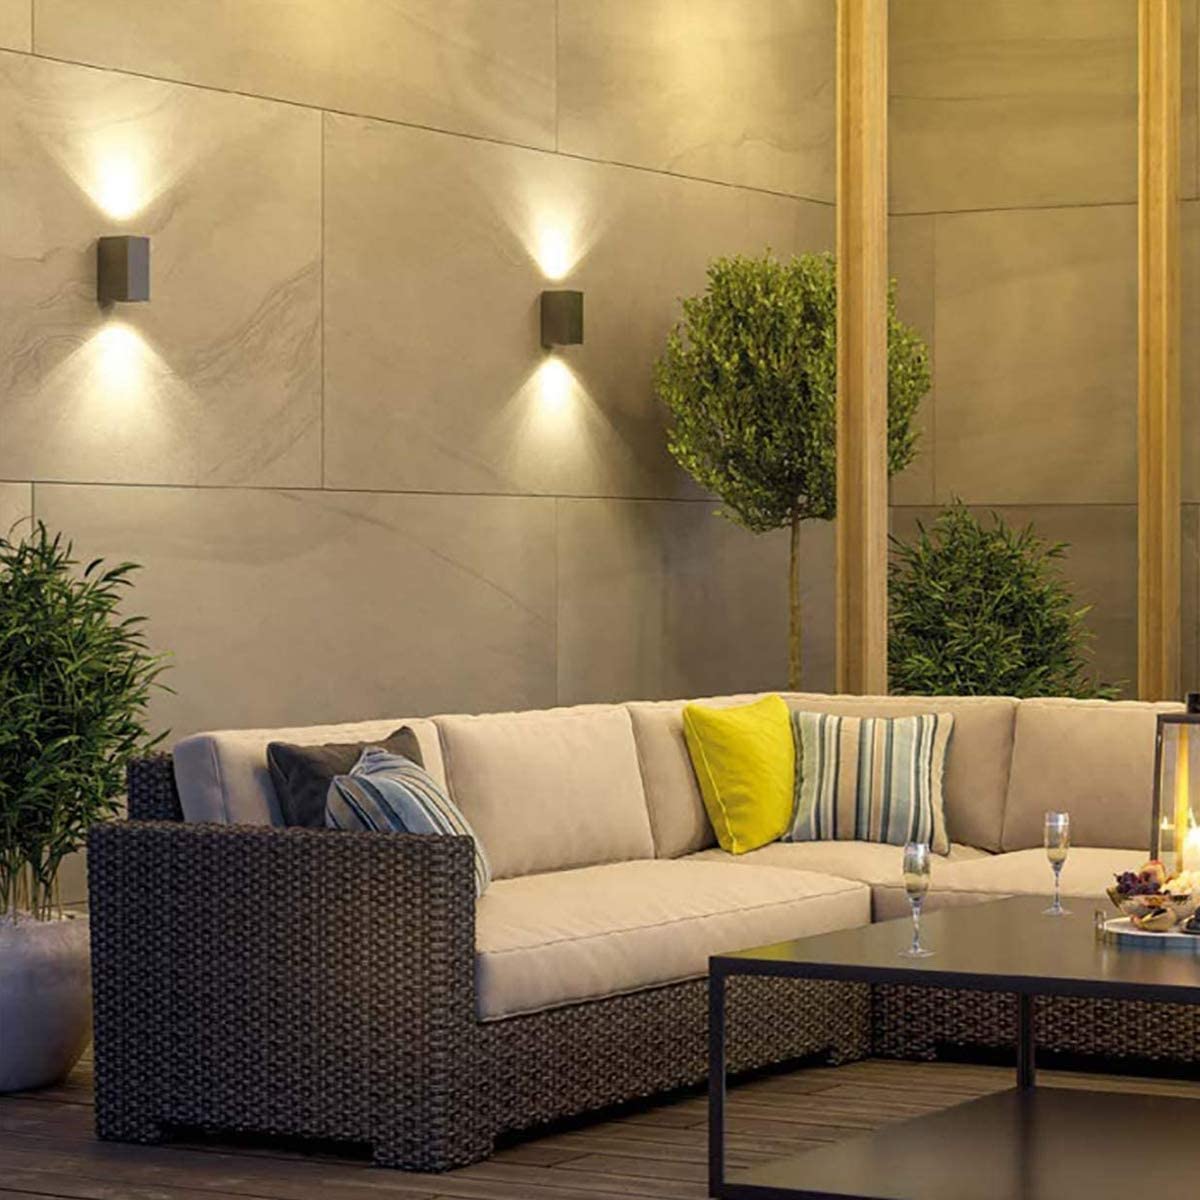 Our Tiago  would look perfect in a modern or more traditional home design. Outdoor sconces can provide ambient light in your garden, at your front door or on your terrace, as well as a great security solution. It is designed for durability and longevity with its robust material producing a fully weather and waterproof lighting fixture. 